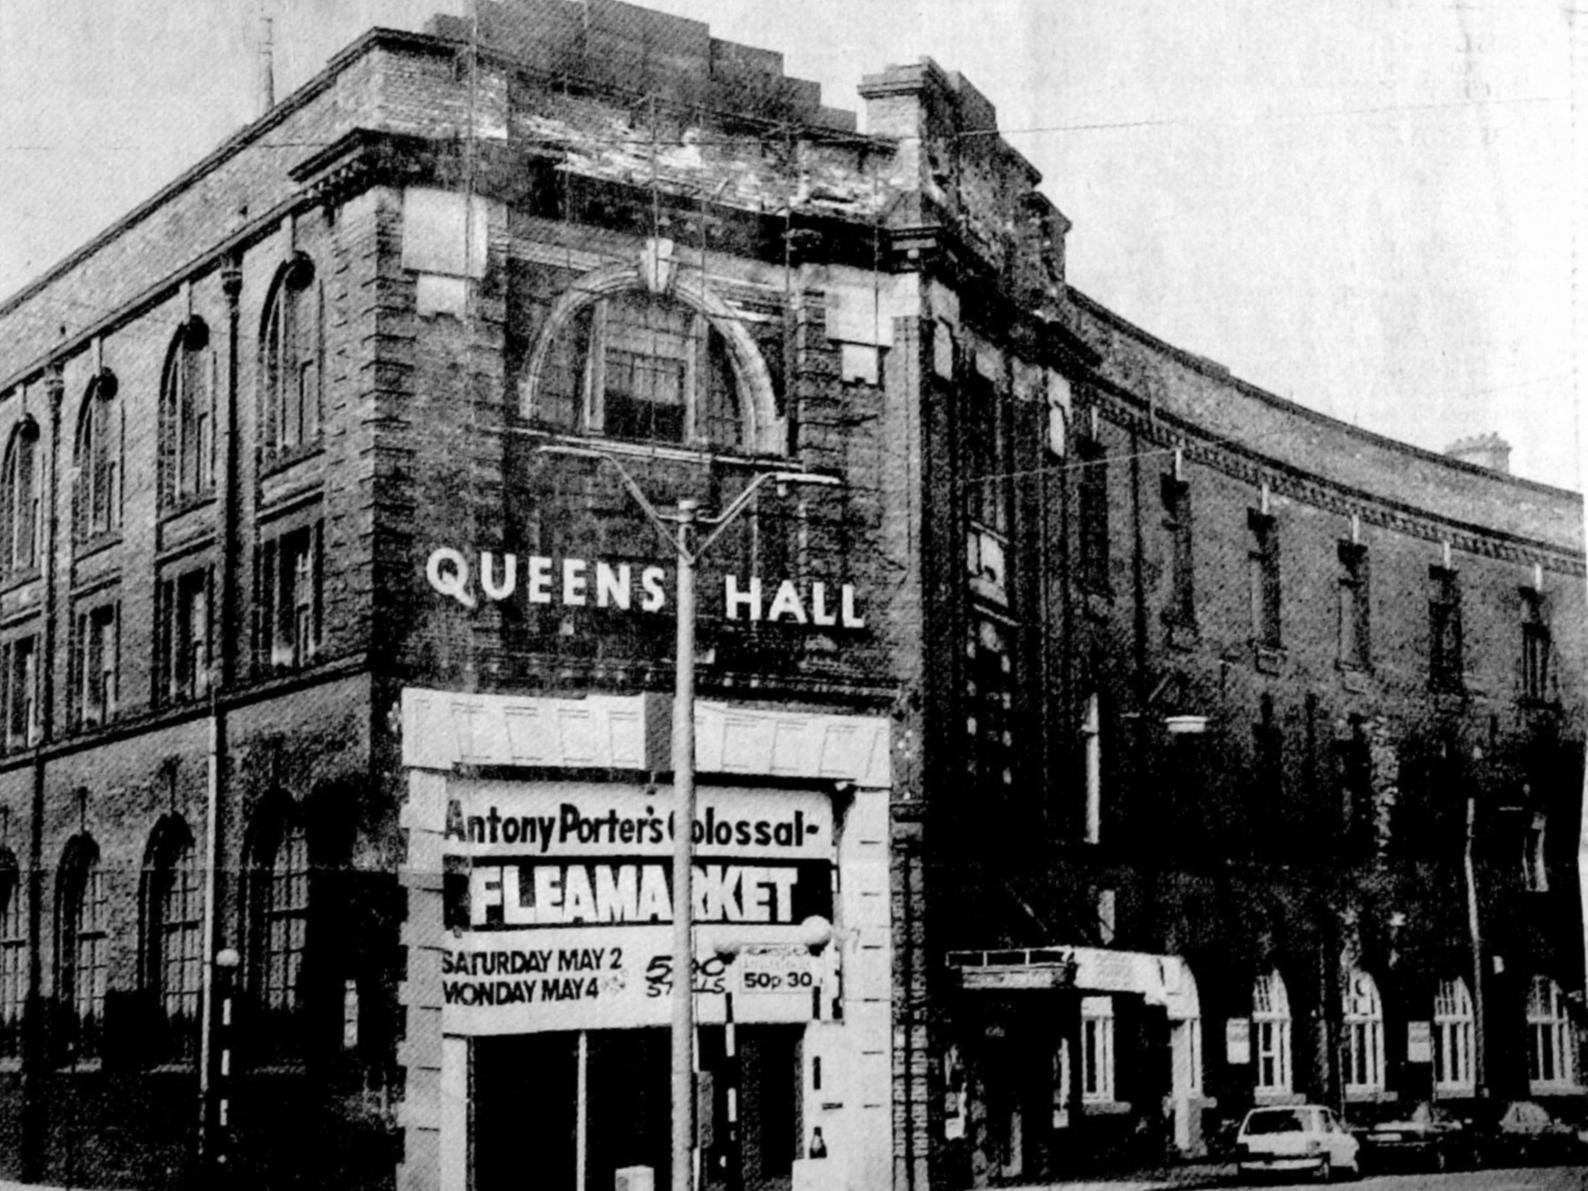 The now demolished Queens Hall in the city centre hosted two music festivals in 1979 and 1980 whose line ups read like a who's who of rock history. They included Hawkwind, U2, Joy Division and Echo and the Bunnymen.